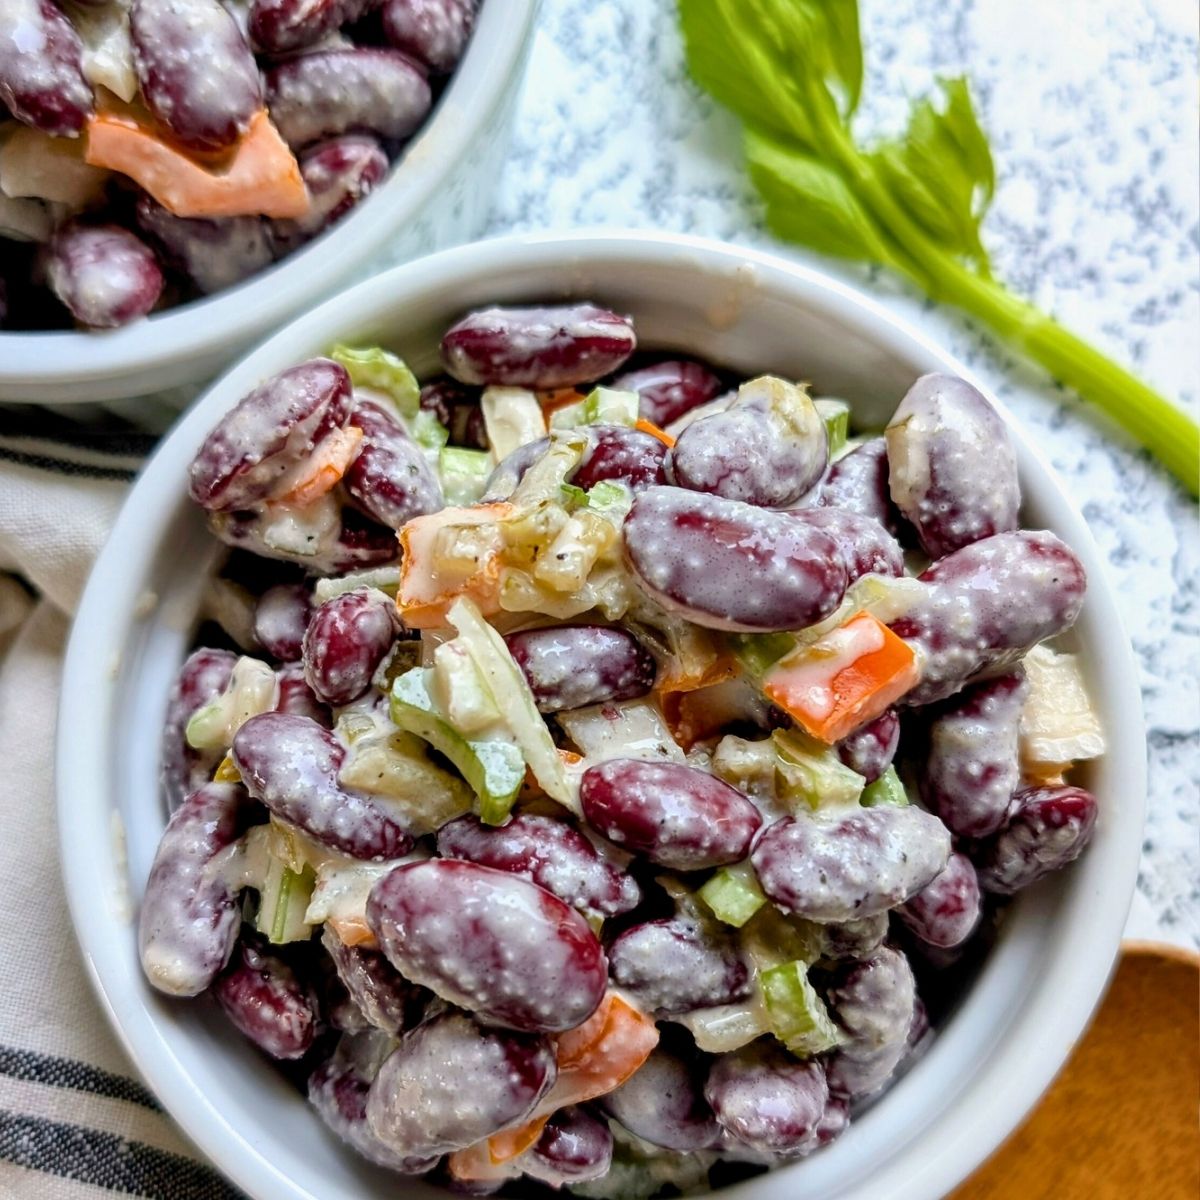 creamy kidney bean salad recipe in a bowl with dark red kidney beans bell peppers celery in a creamy mayo dressing.